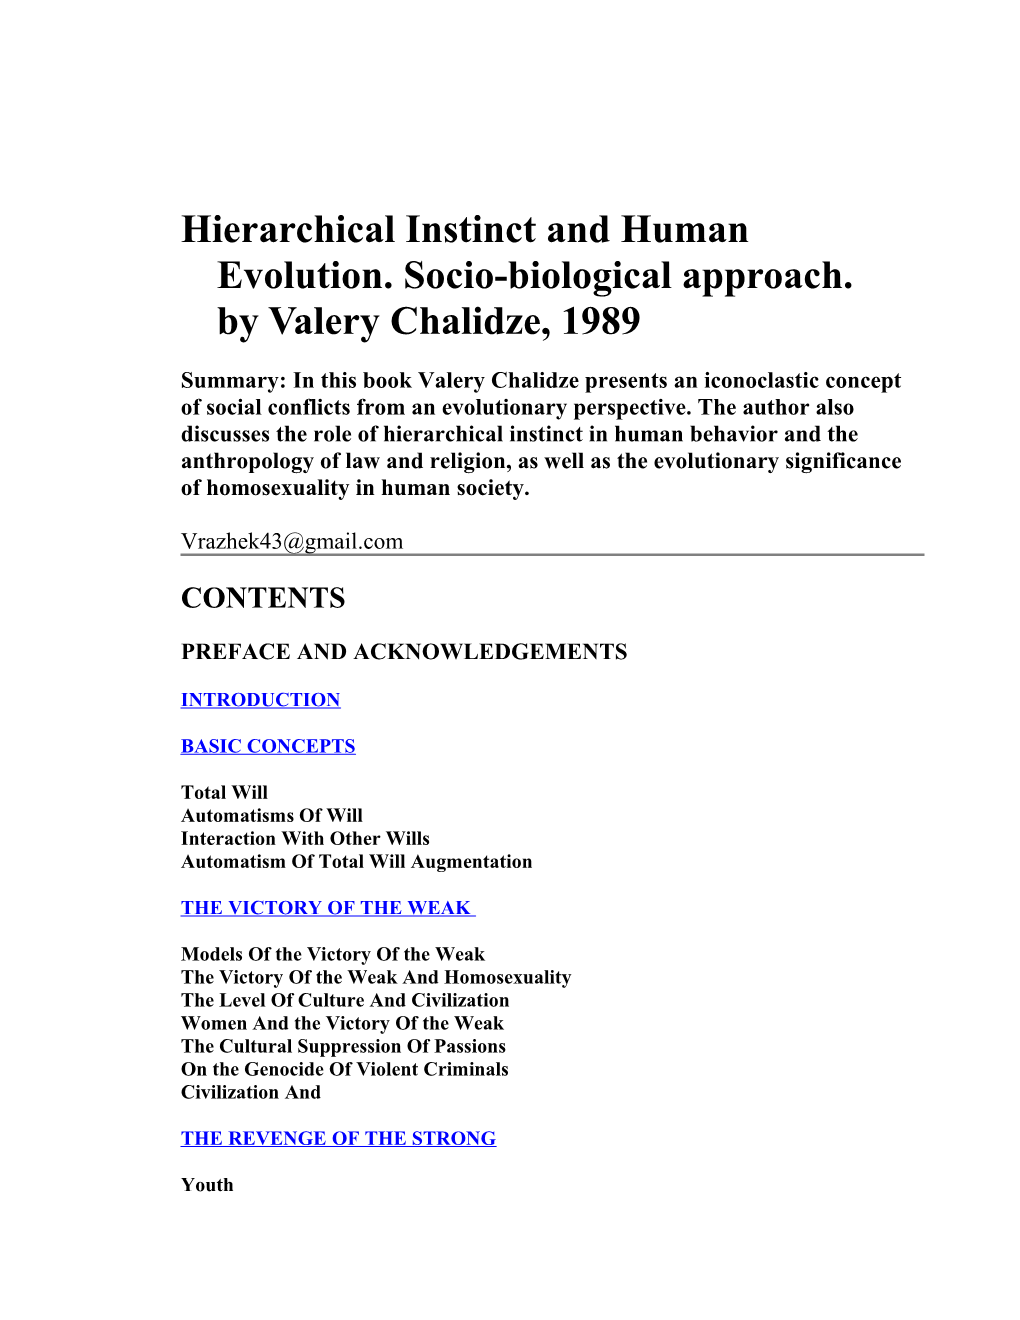 Hierarchical Instinct and Human Evolution. Socio-Biological Approach. by Valery Chalidze, 1989